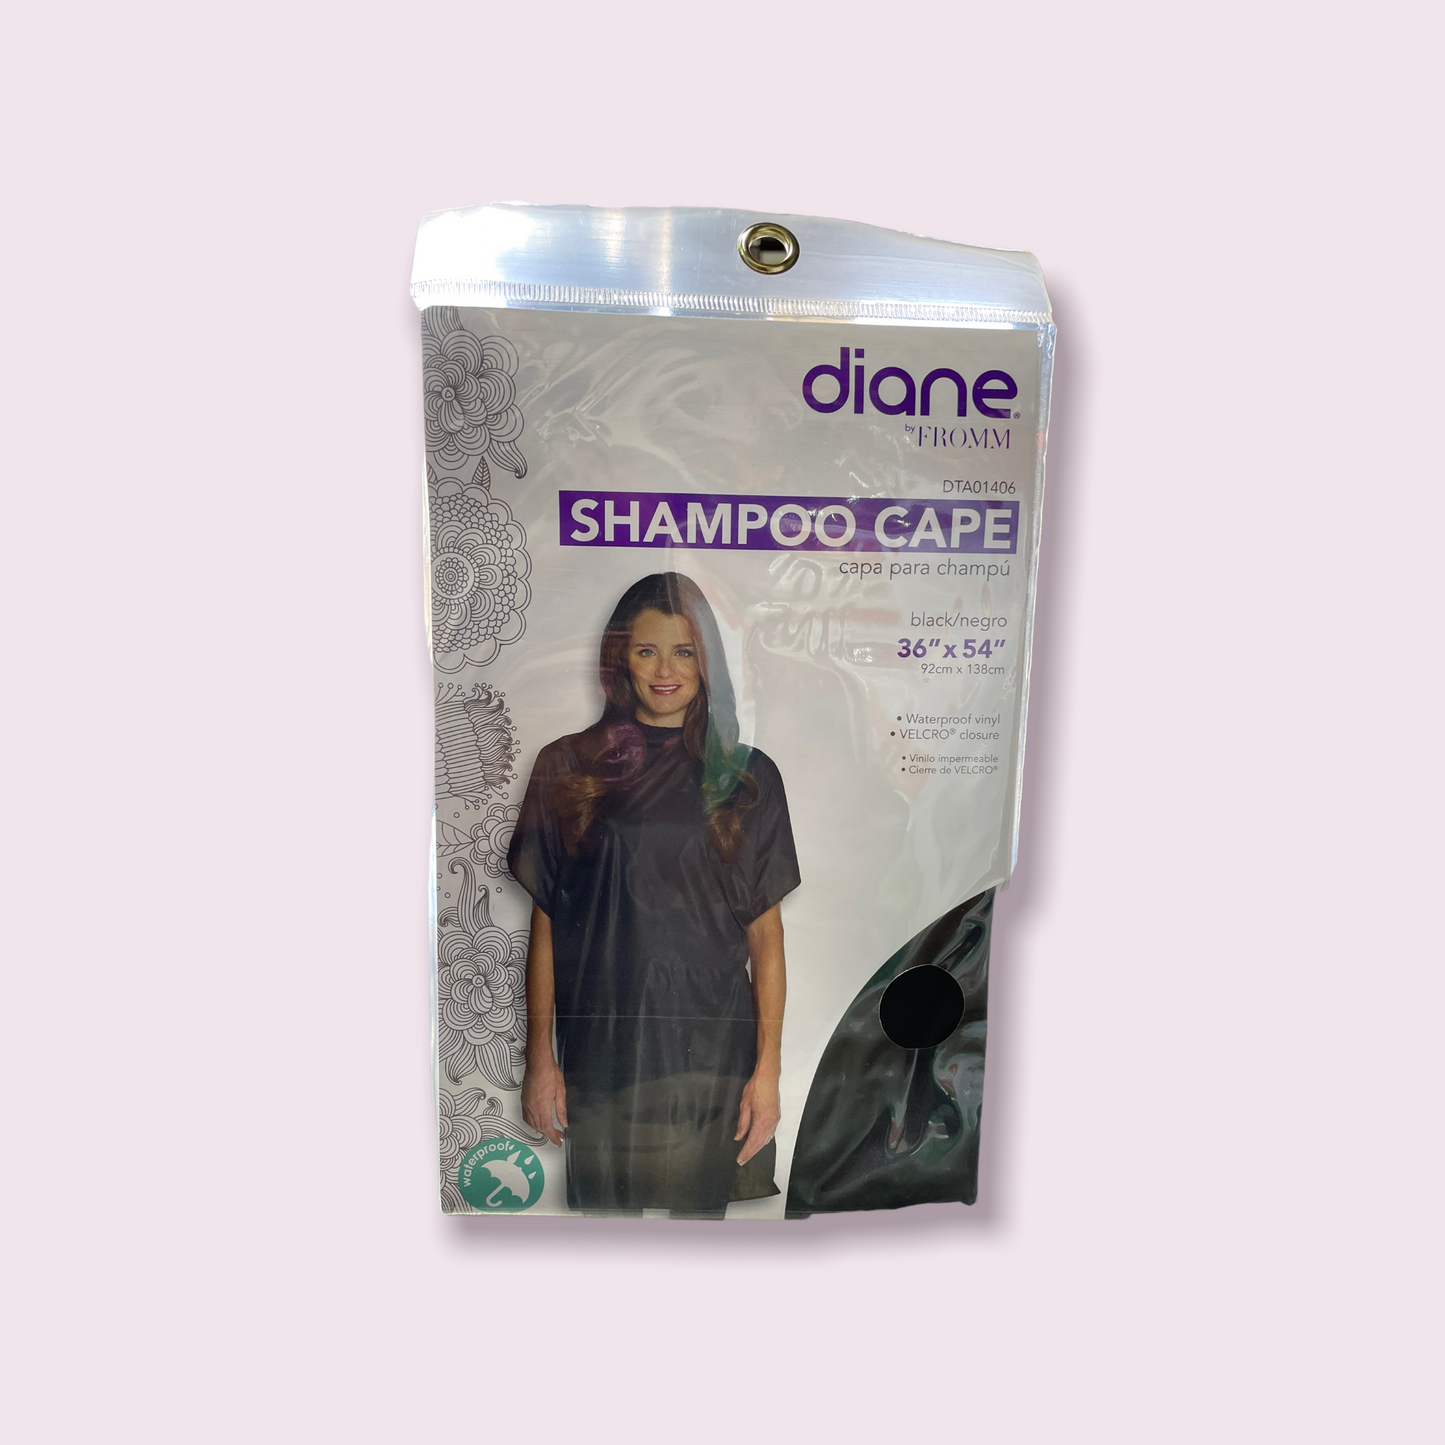 Diane / Fromm Shampoo Capes